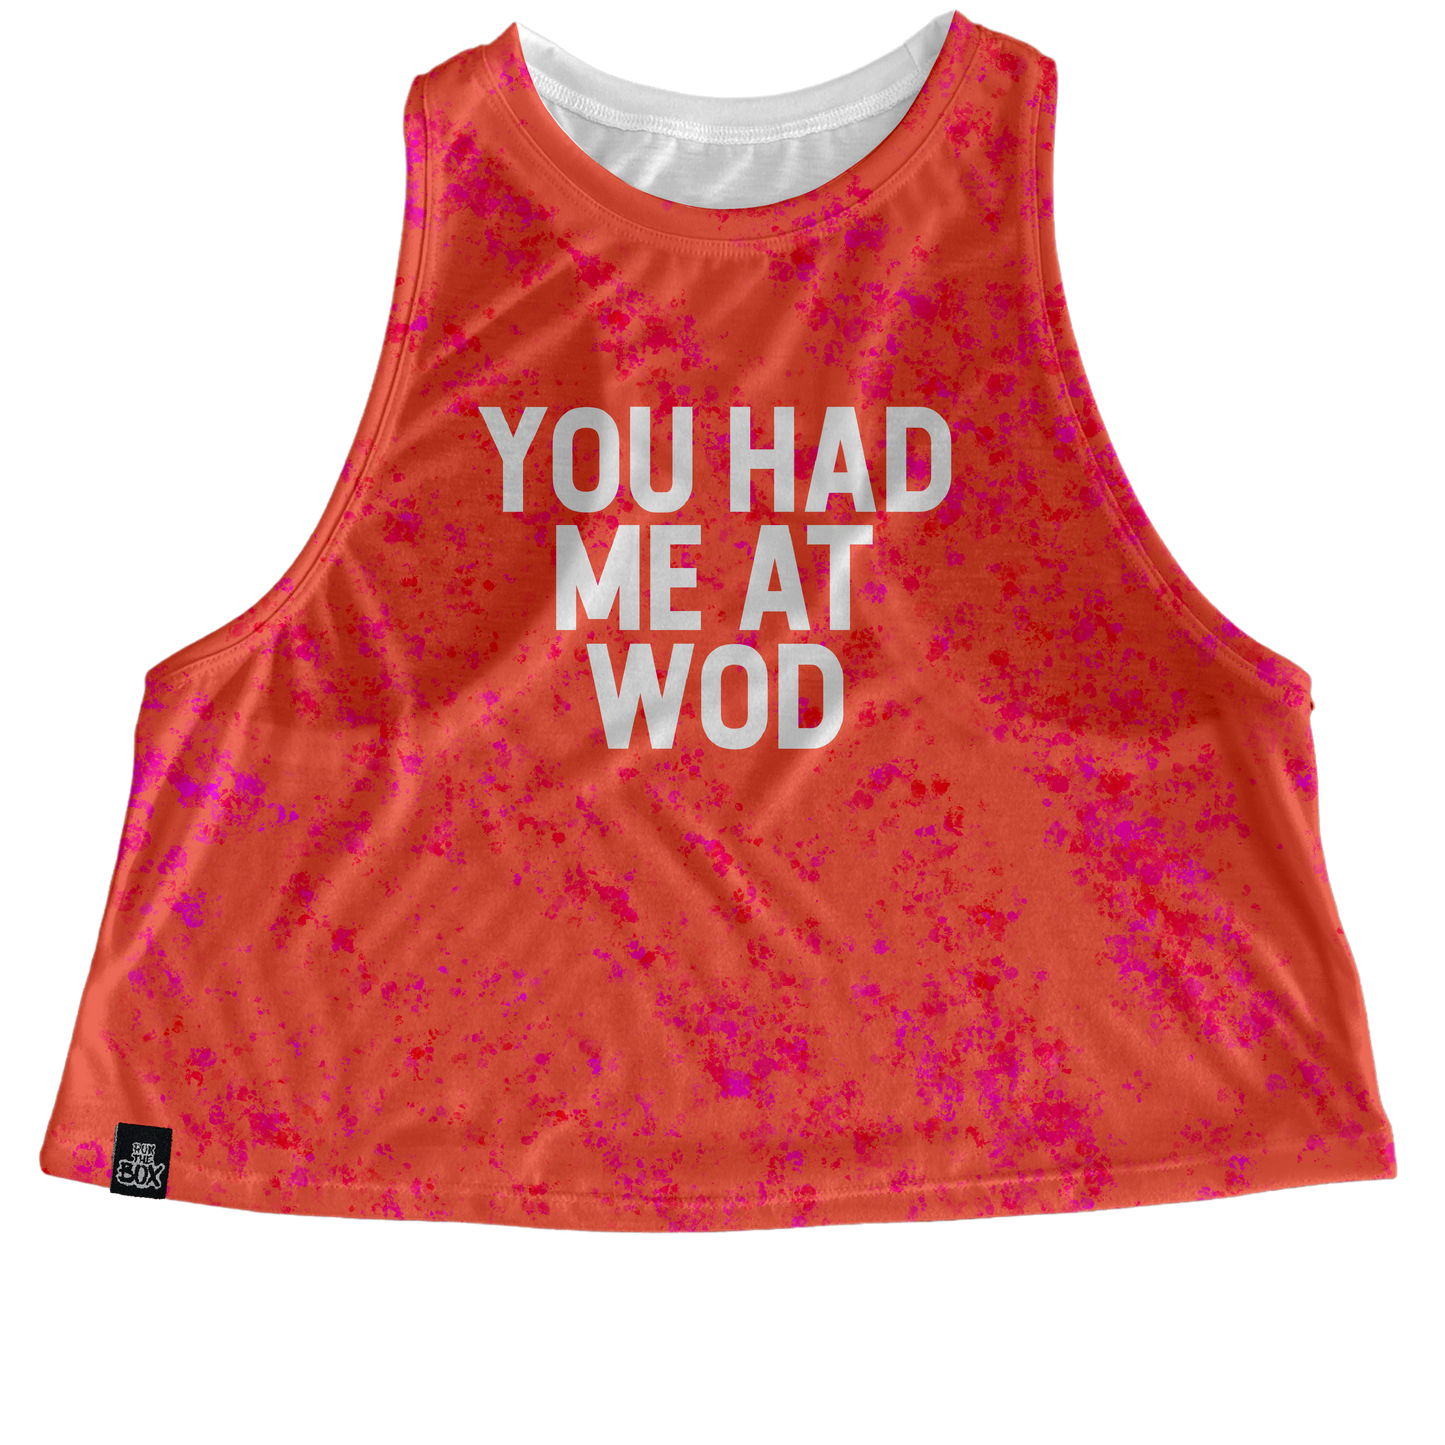 You Had Me At WOD (oranges)Tops